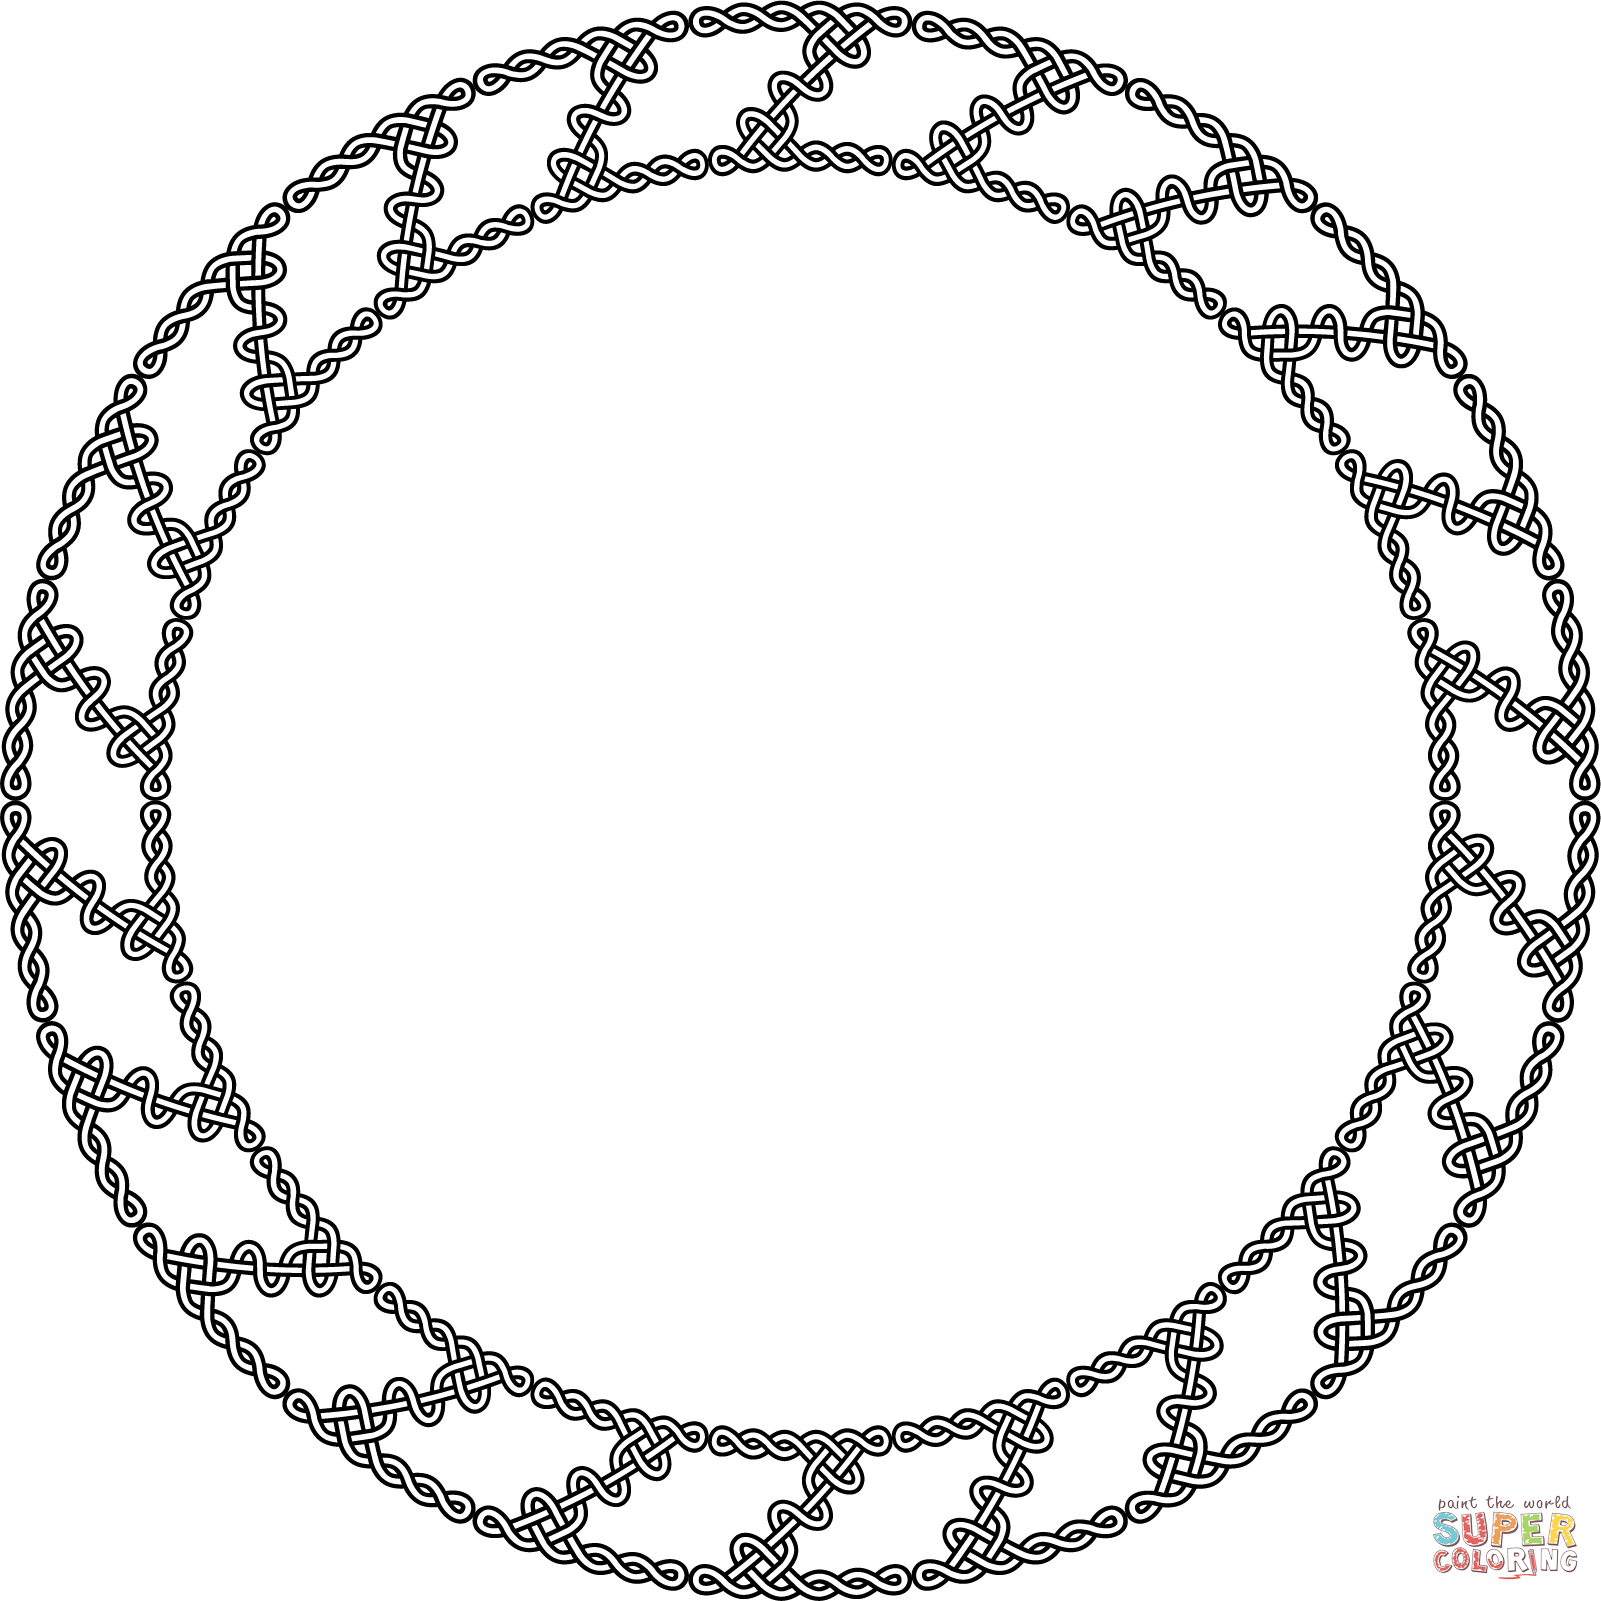 Celtic knot circle frame coloring page free printable coloring pages